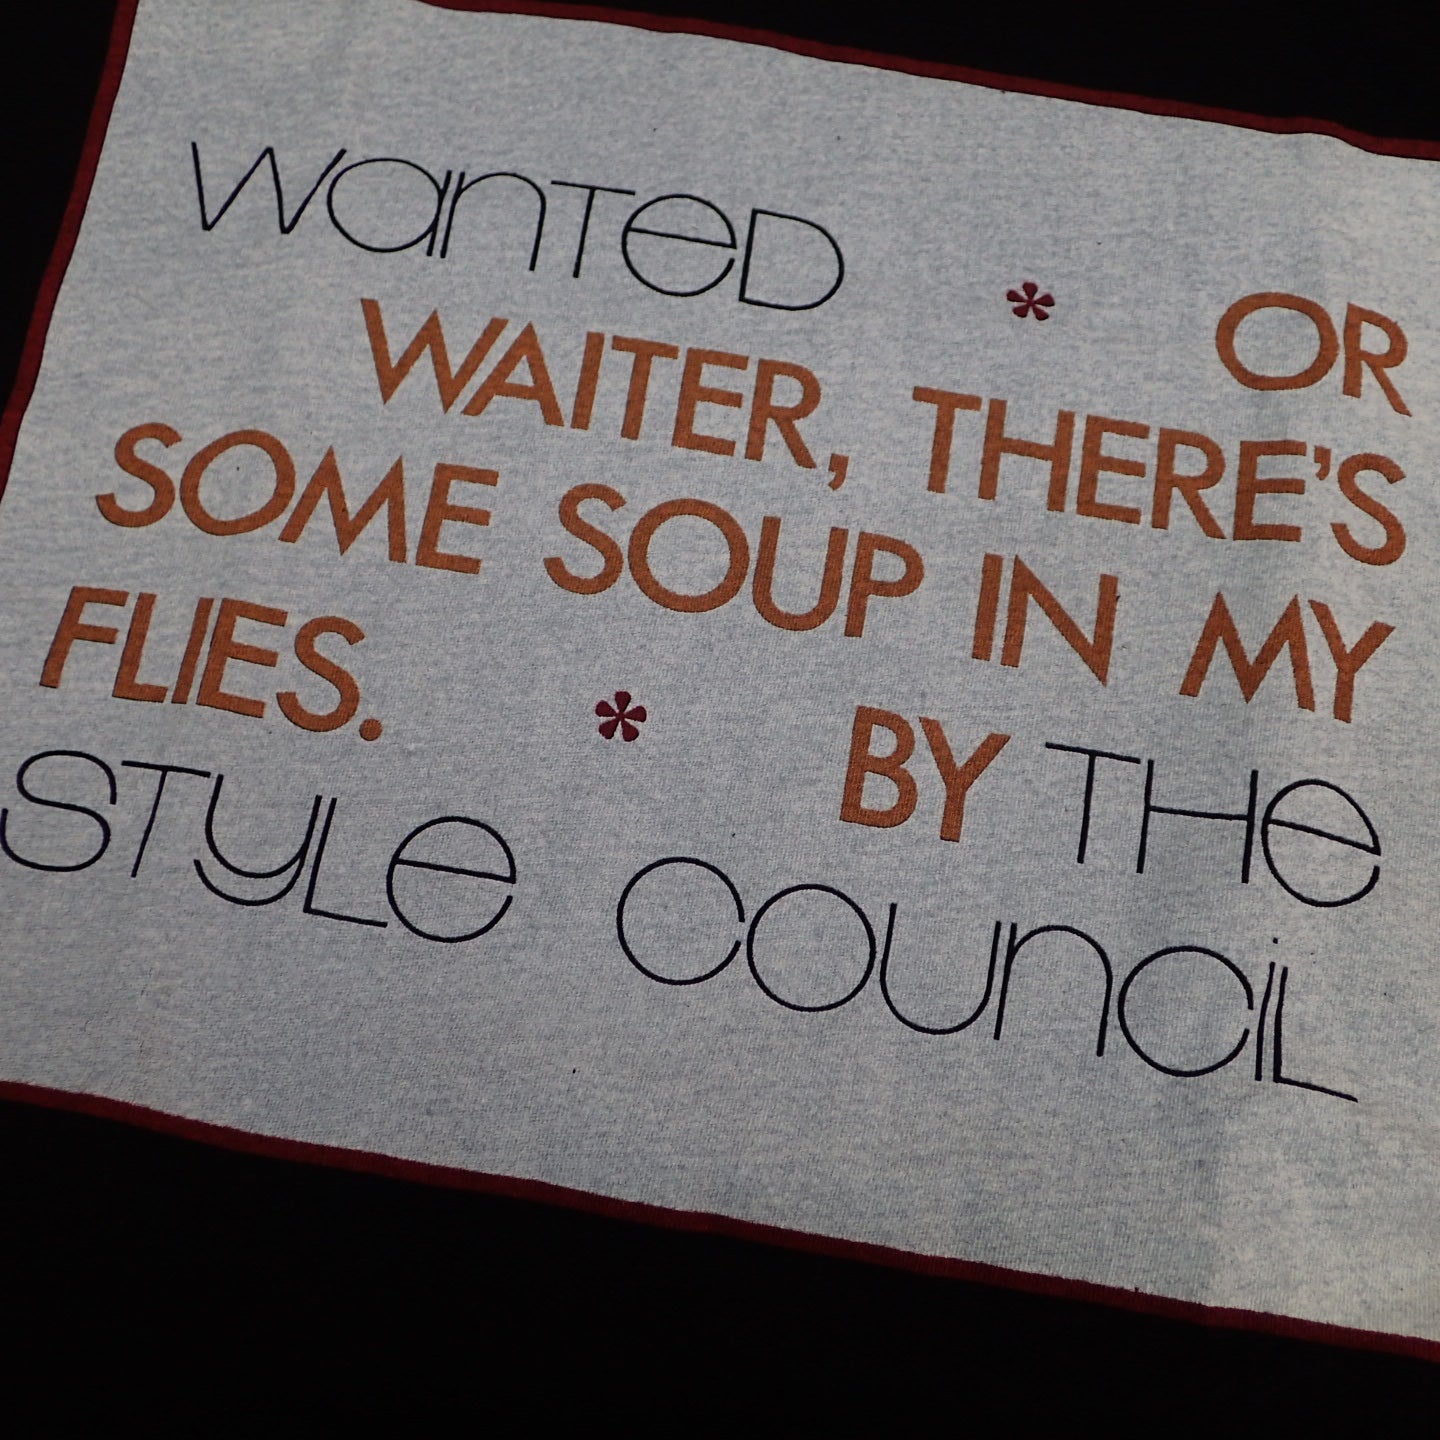 80s The Style Council  T-shirt "Wanted (Or Waiter, There's Some Soup In My Files) Tee"